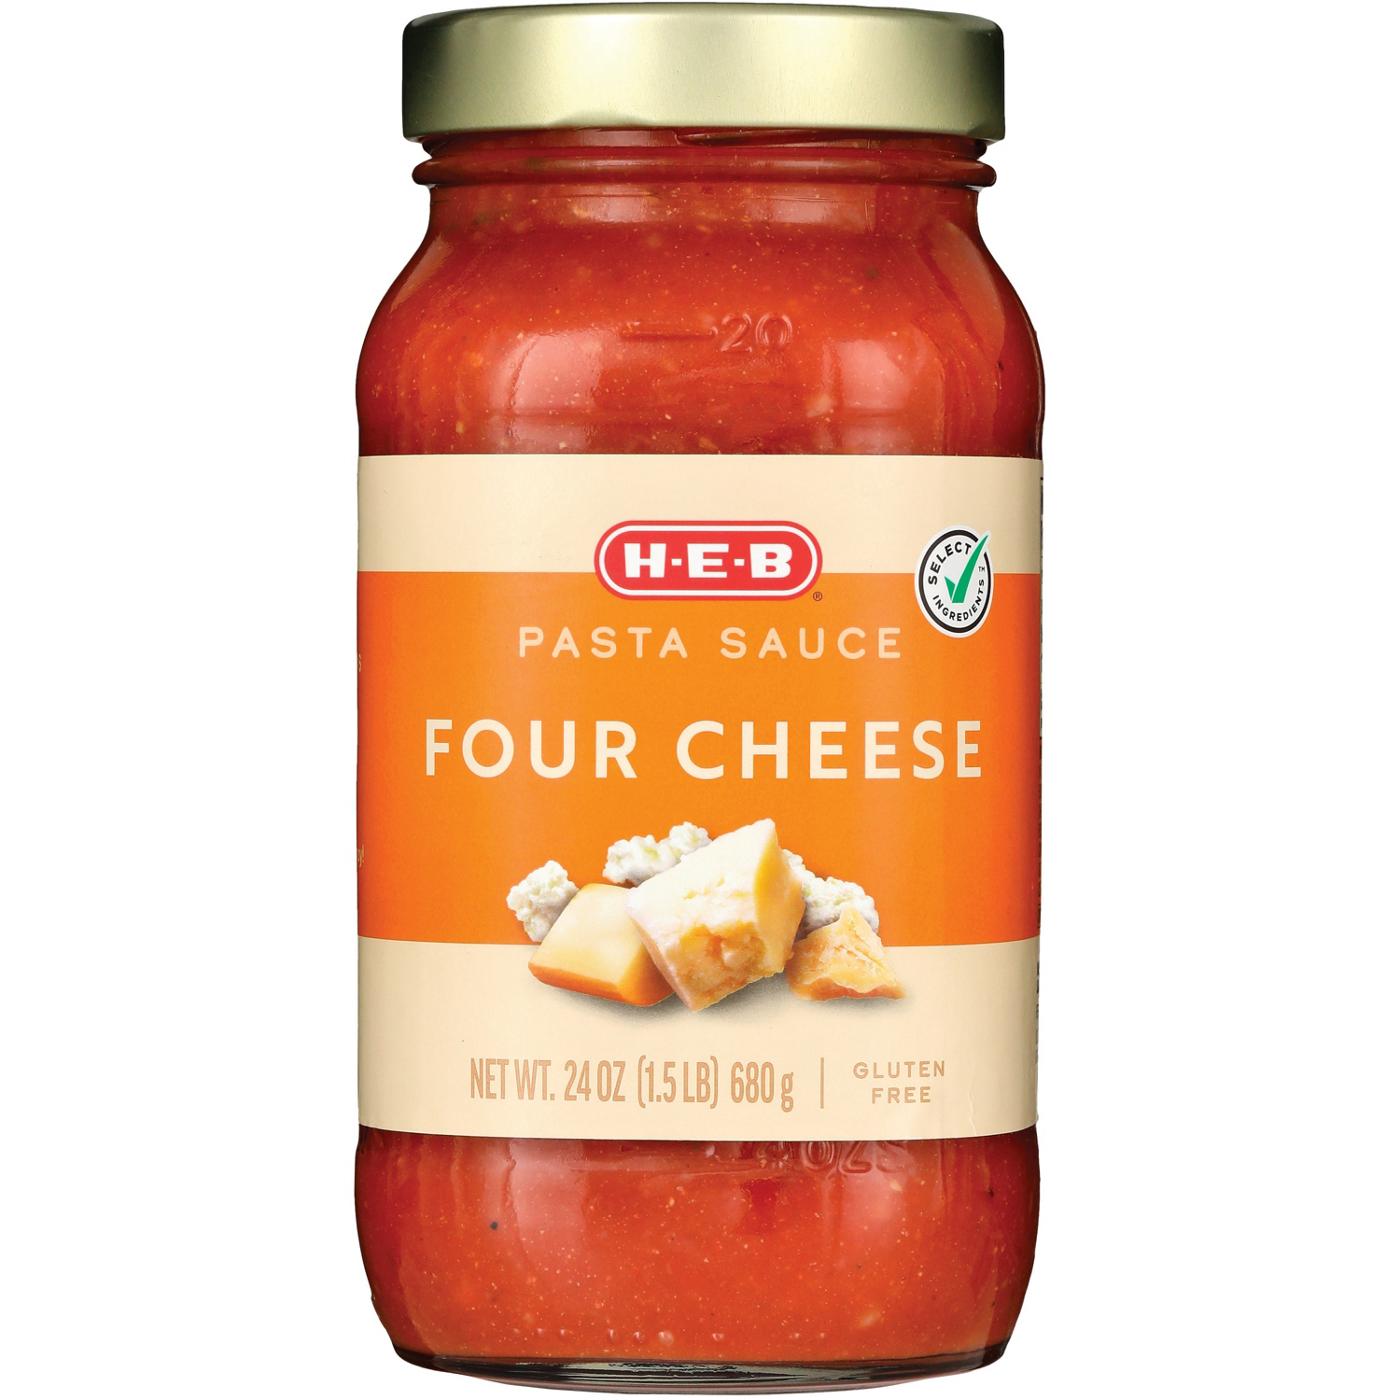 H-E-B Four Cheese Pasta Sauce; image 1 of 2